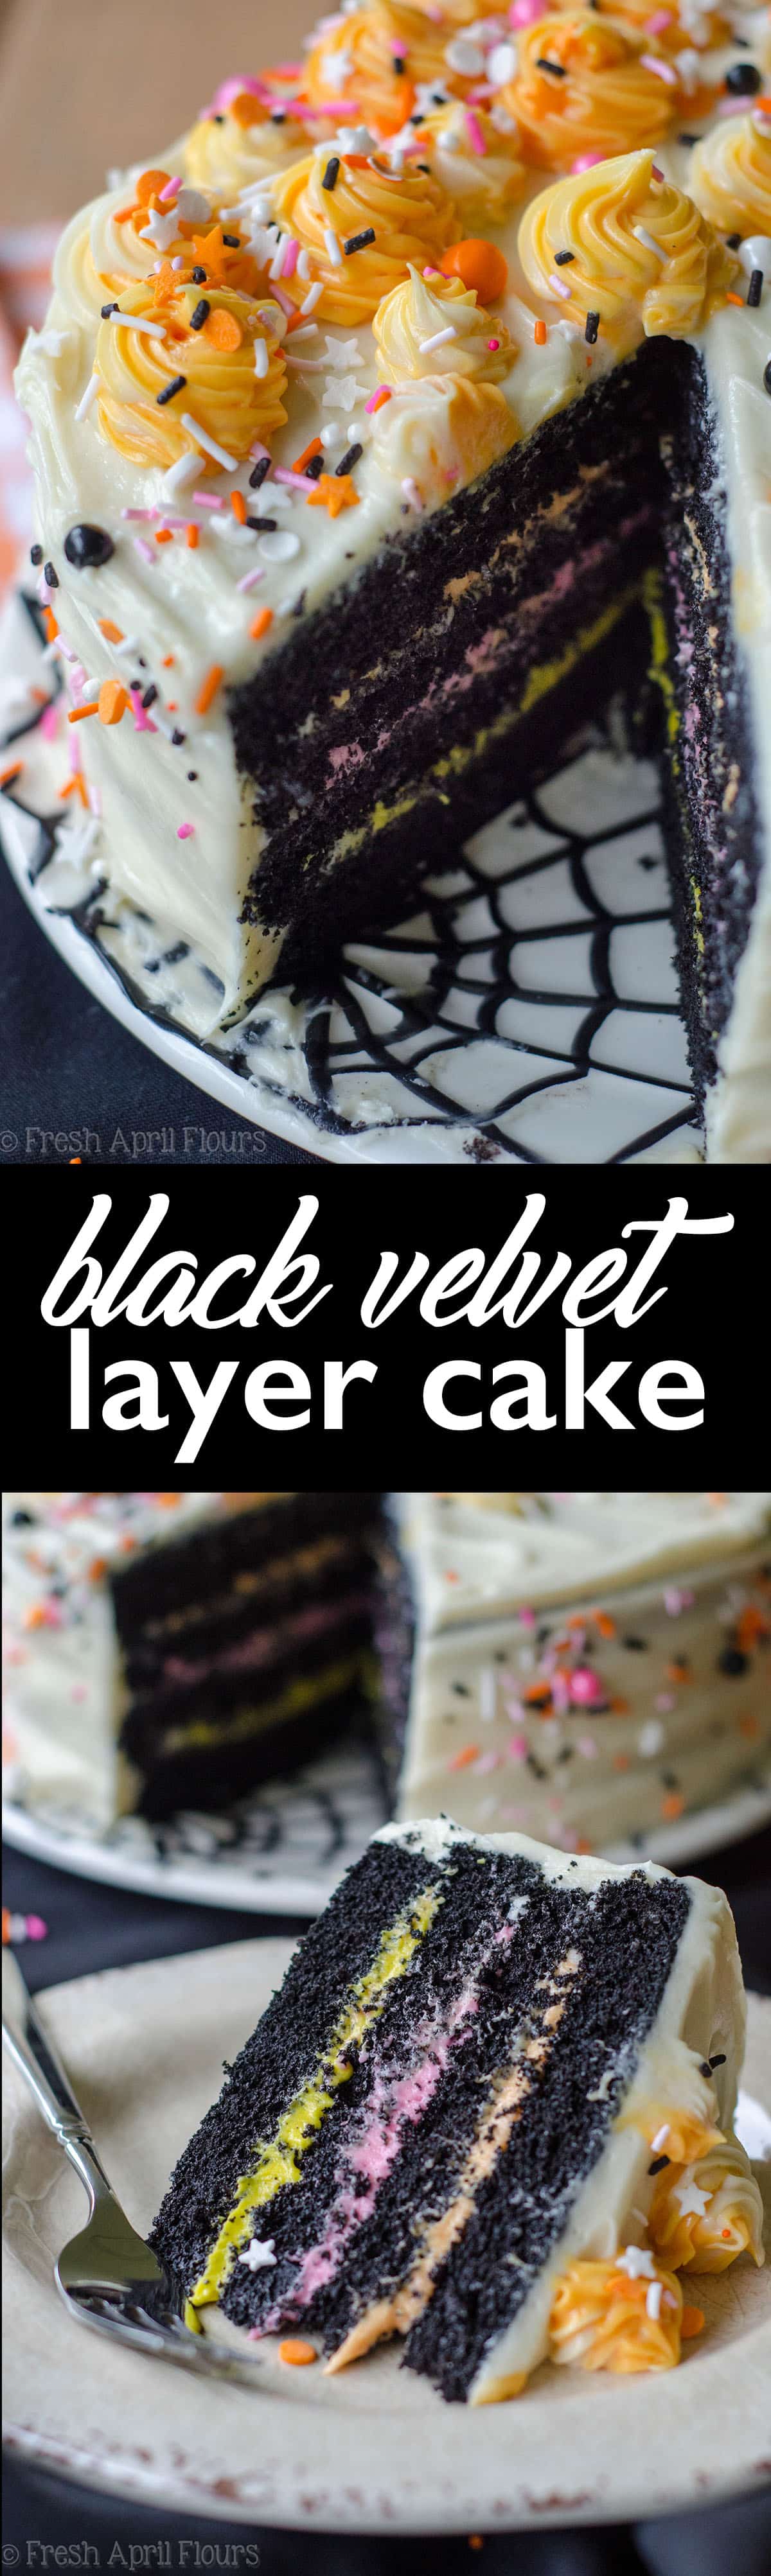 Classic red velvet cake gets a spooky makeover in this black velvet edition perfect for Halloween! via @frshaprilflours